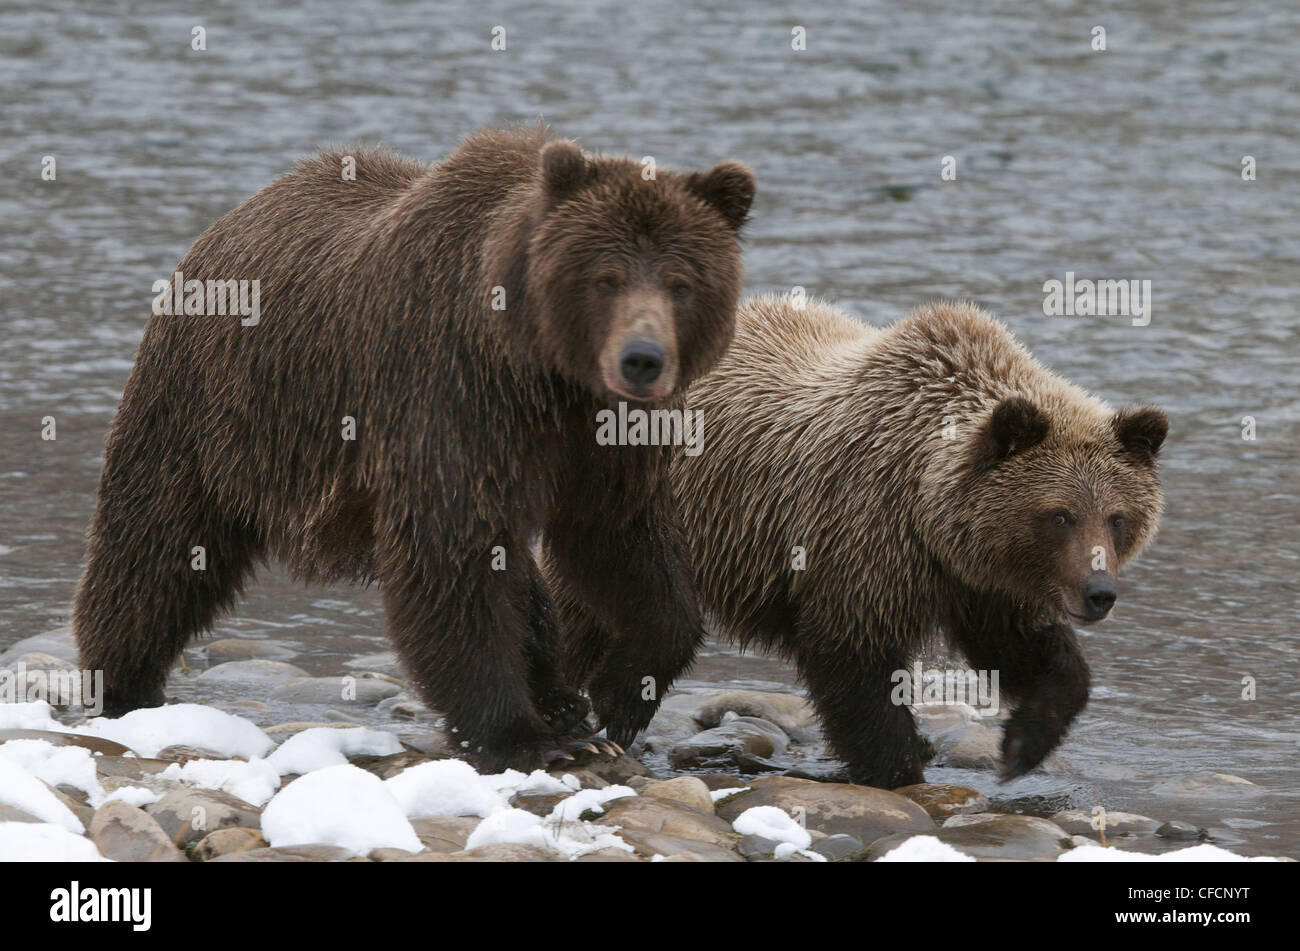 Grizzly Bear and 2nd year cub (Ursus arctos) on Fishing Branch River, Ni'iinlii Njik Ecological Reserve, Yukon Territory, Canada Stock Photo